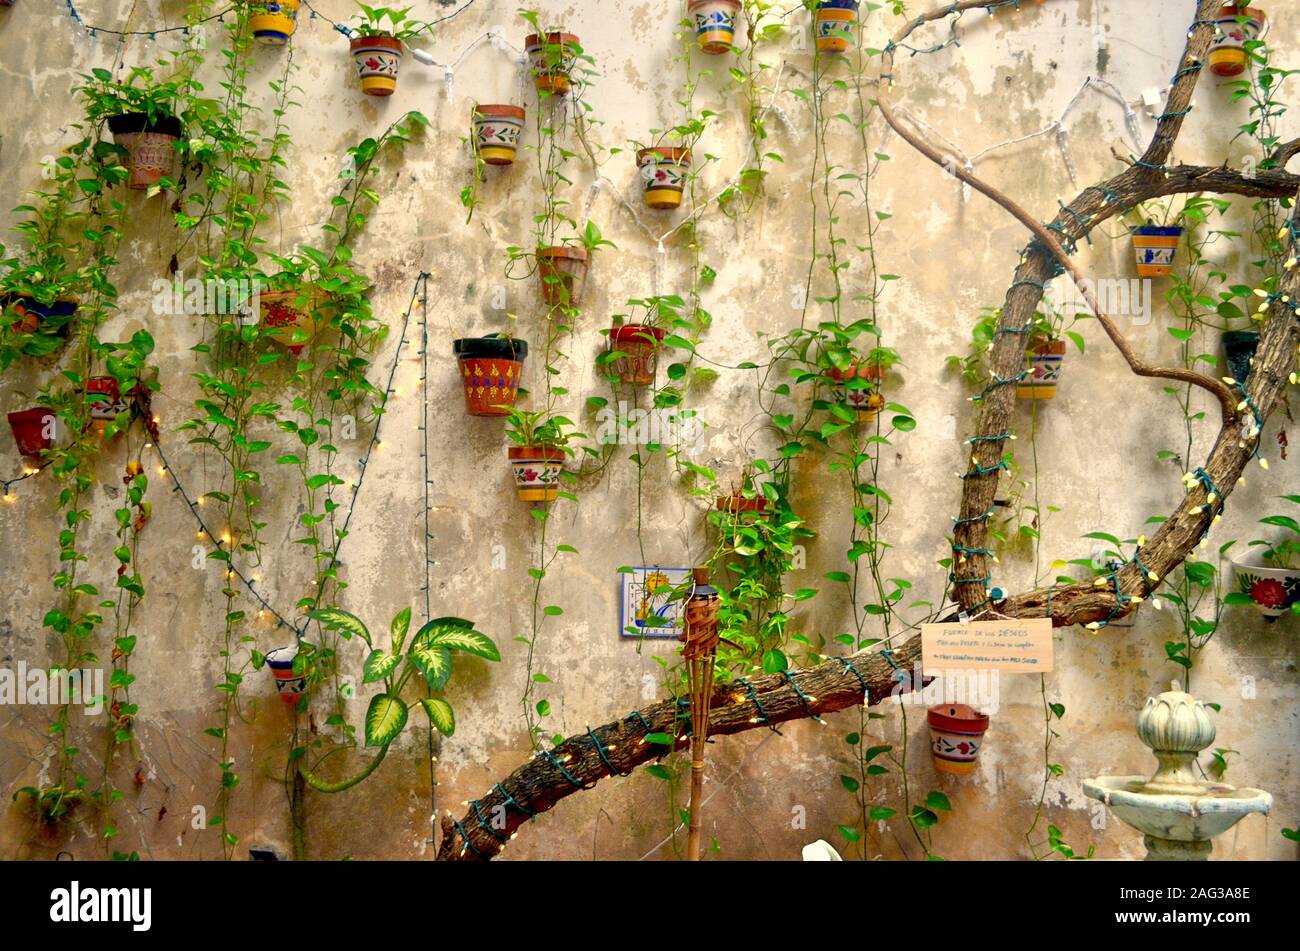 Garden wall with colorful terracotta flower pots, hanging vines, and strings of white lights in Old San Juan, Puerto Rico Stock Photo